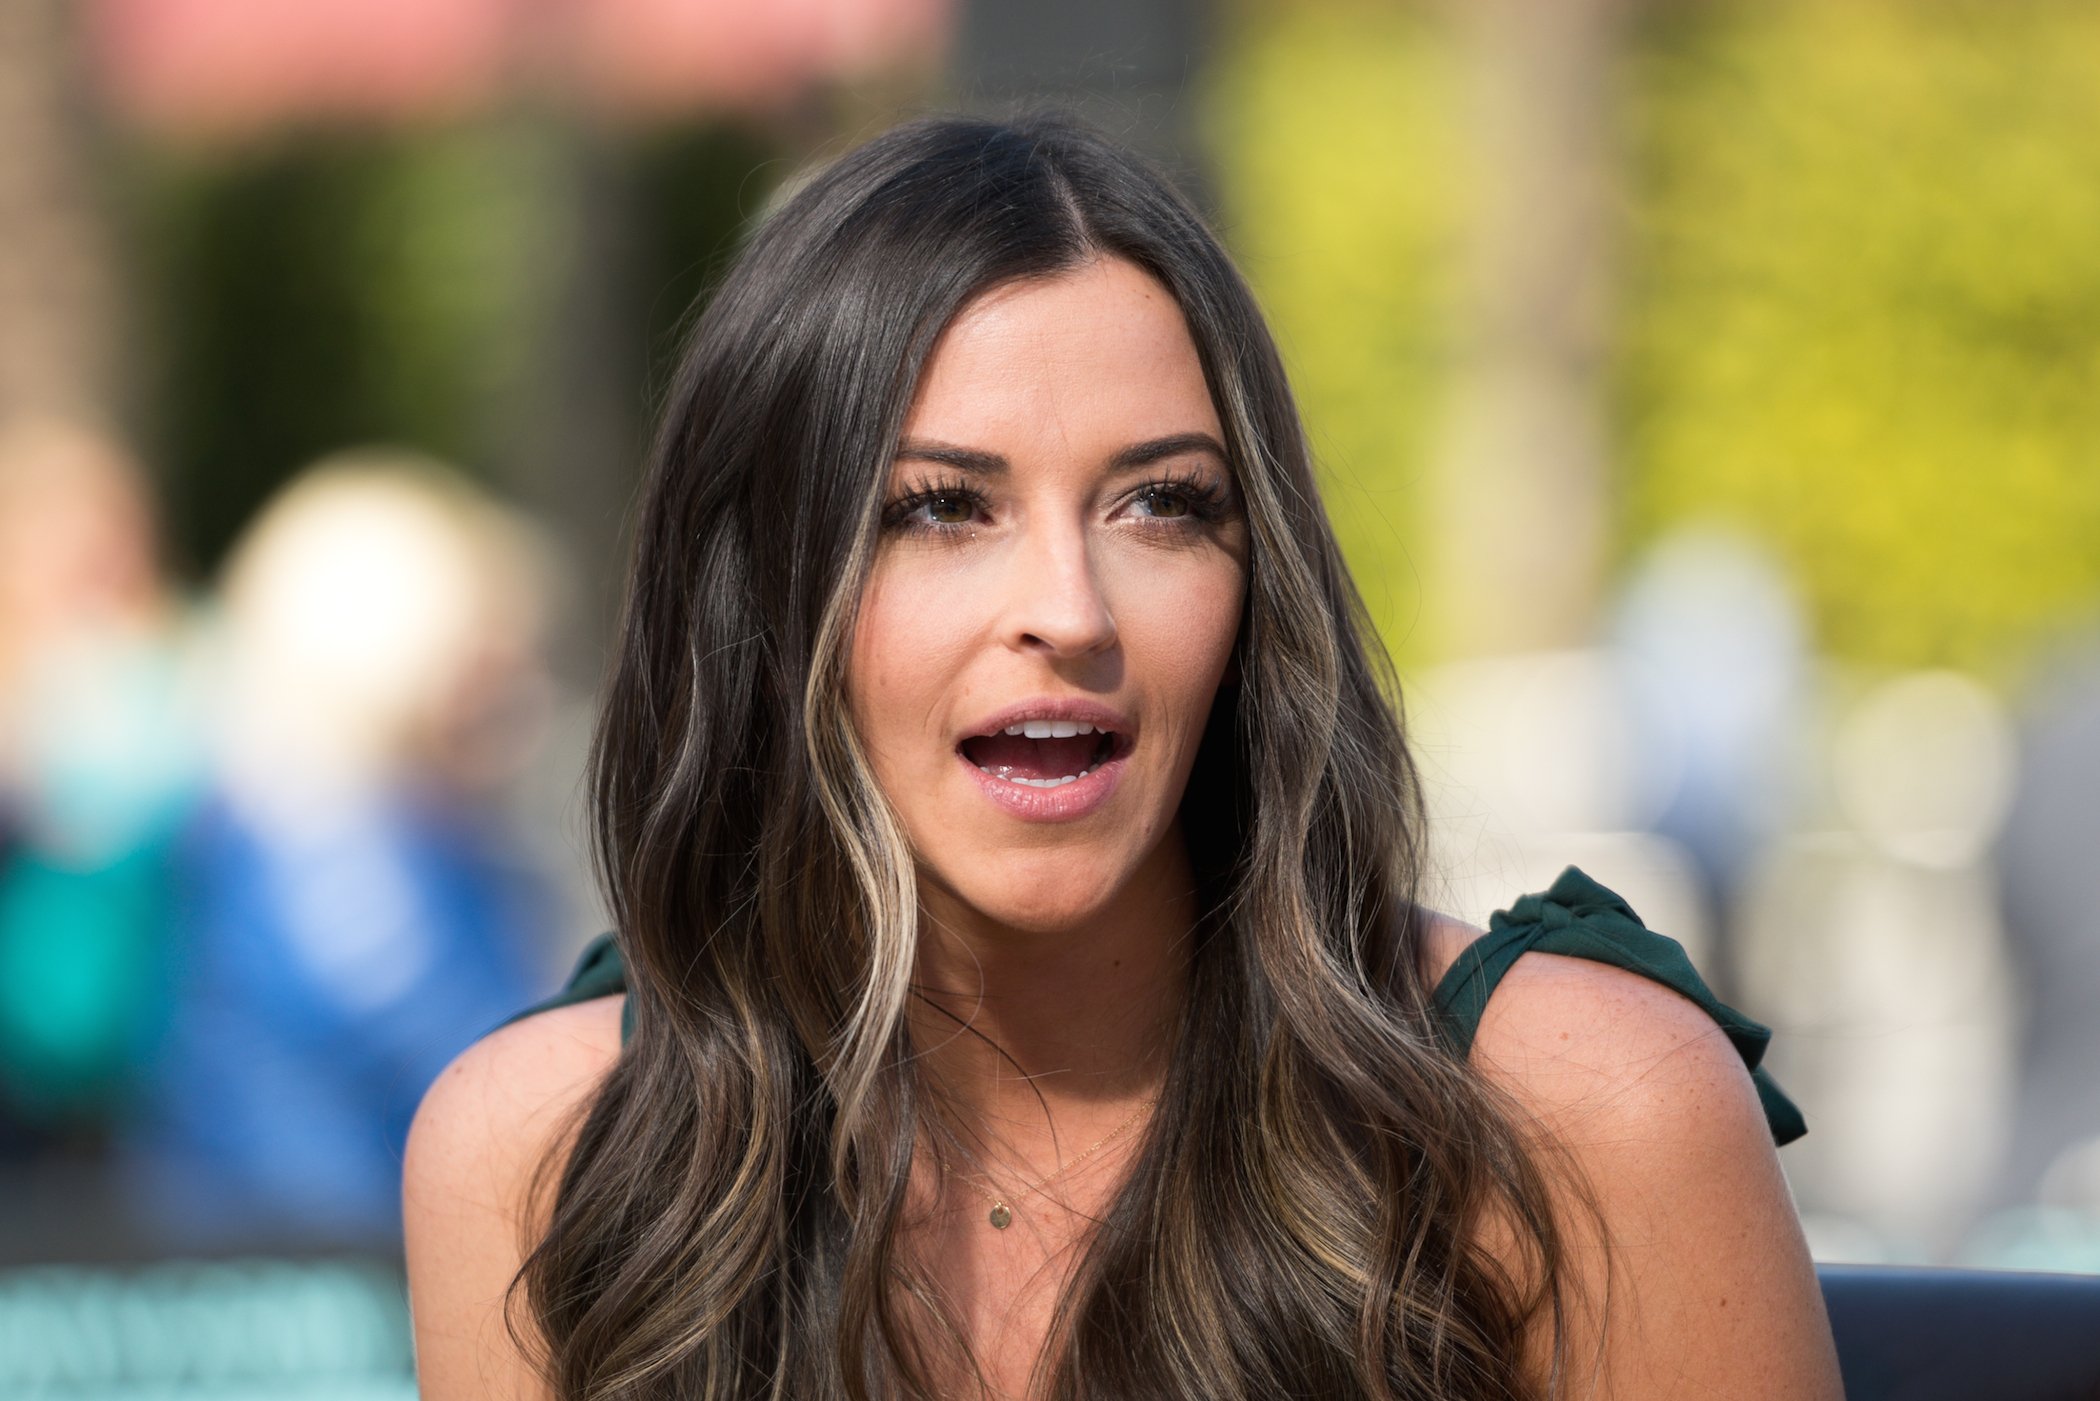 Tia Booth, Colton Underwood's ex from 'Bachelor in Paradise,' sitting and talking